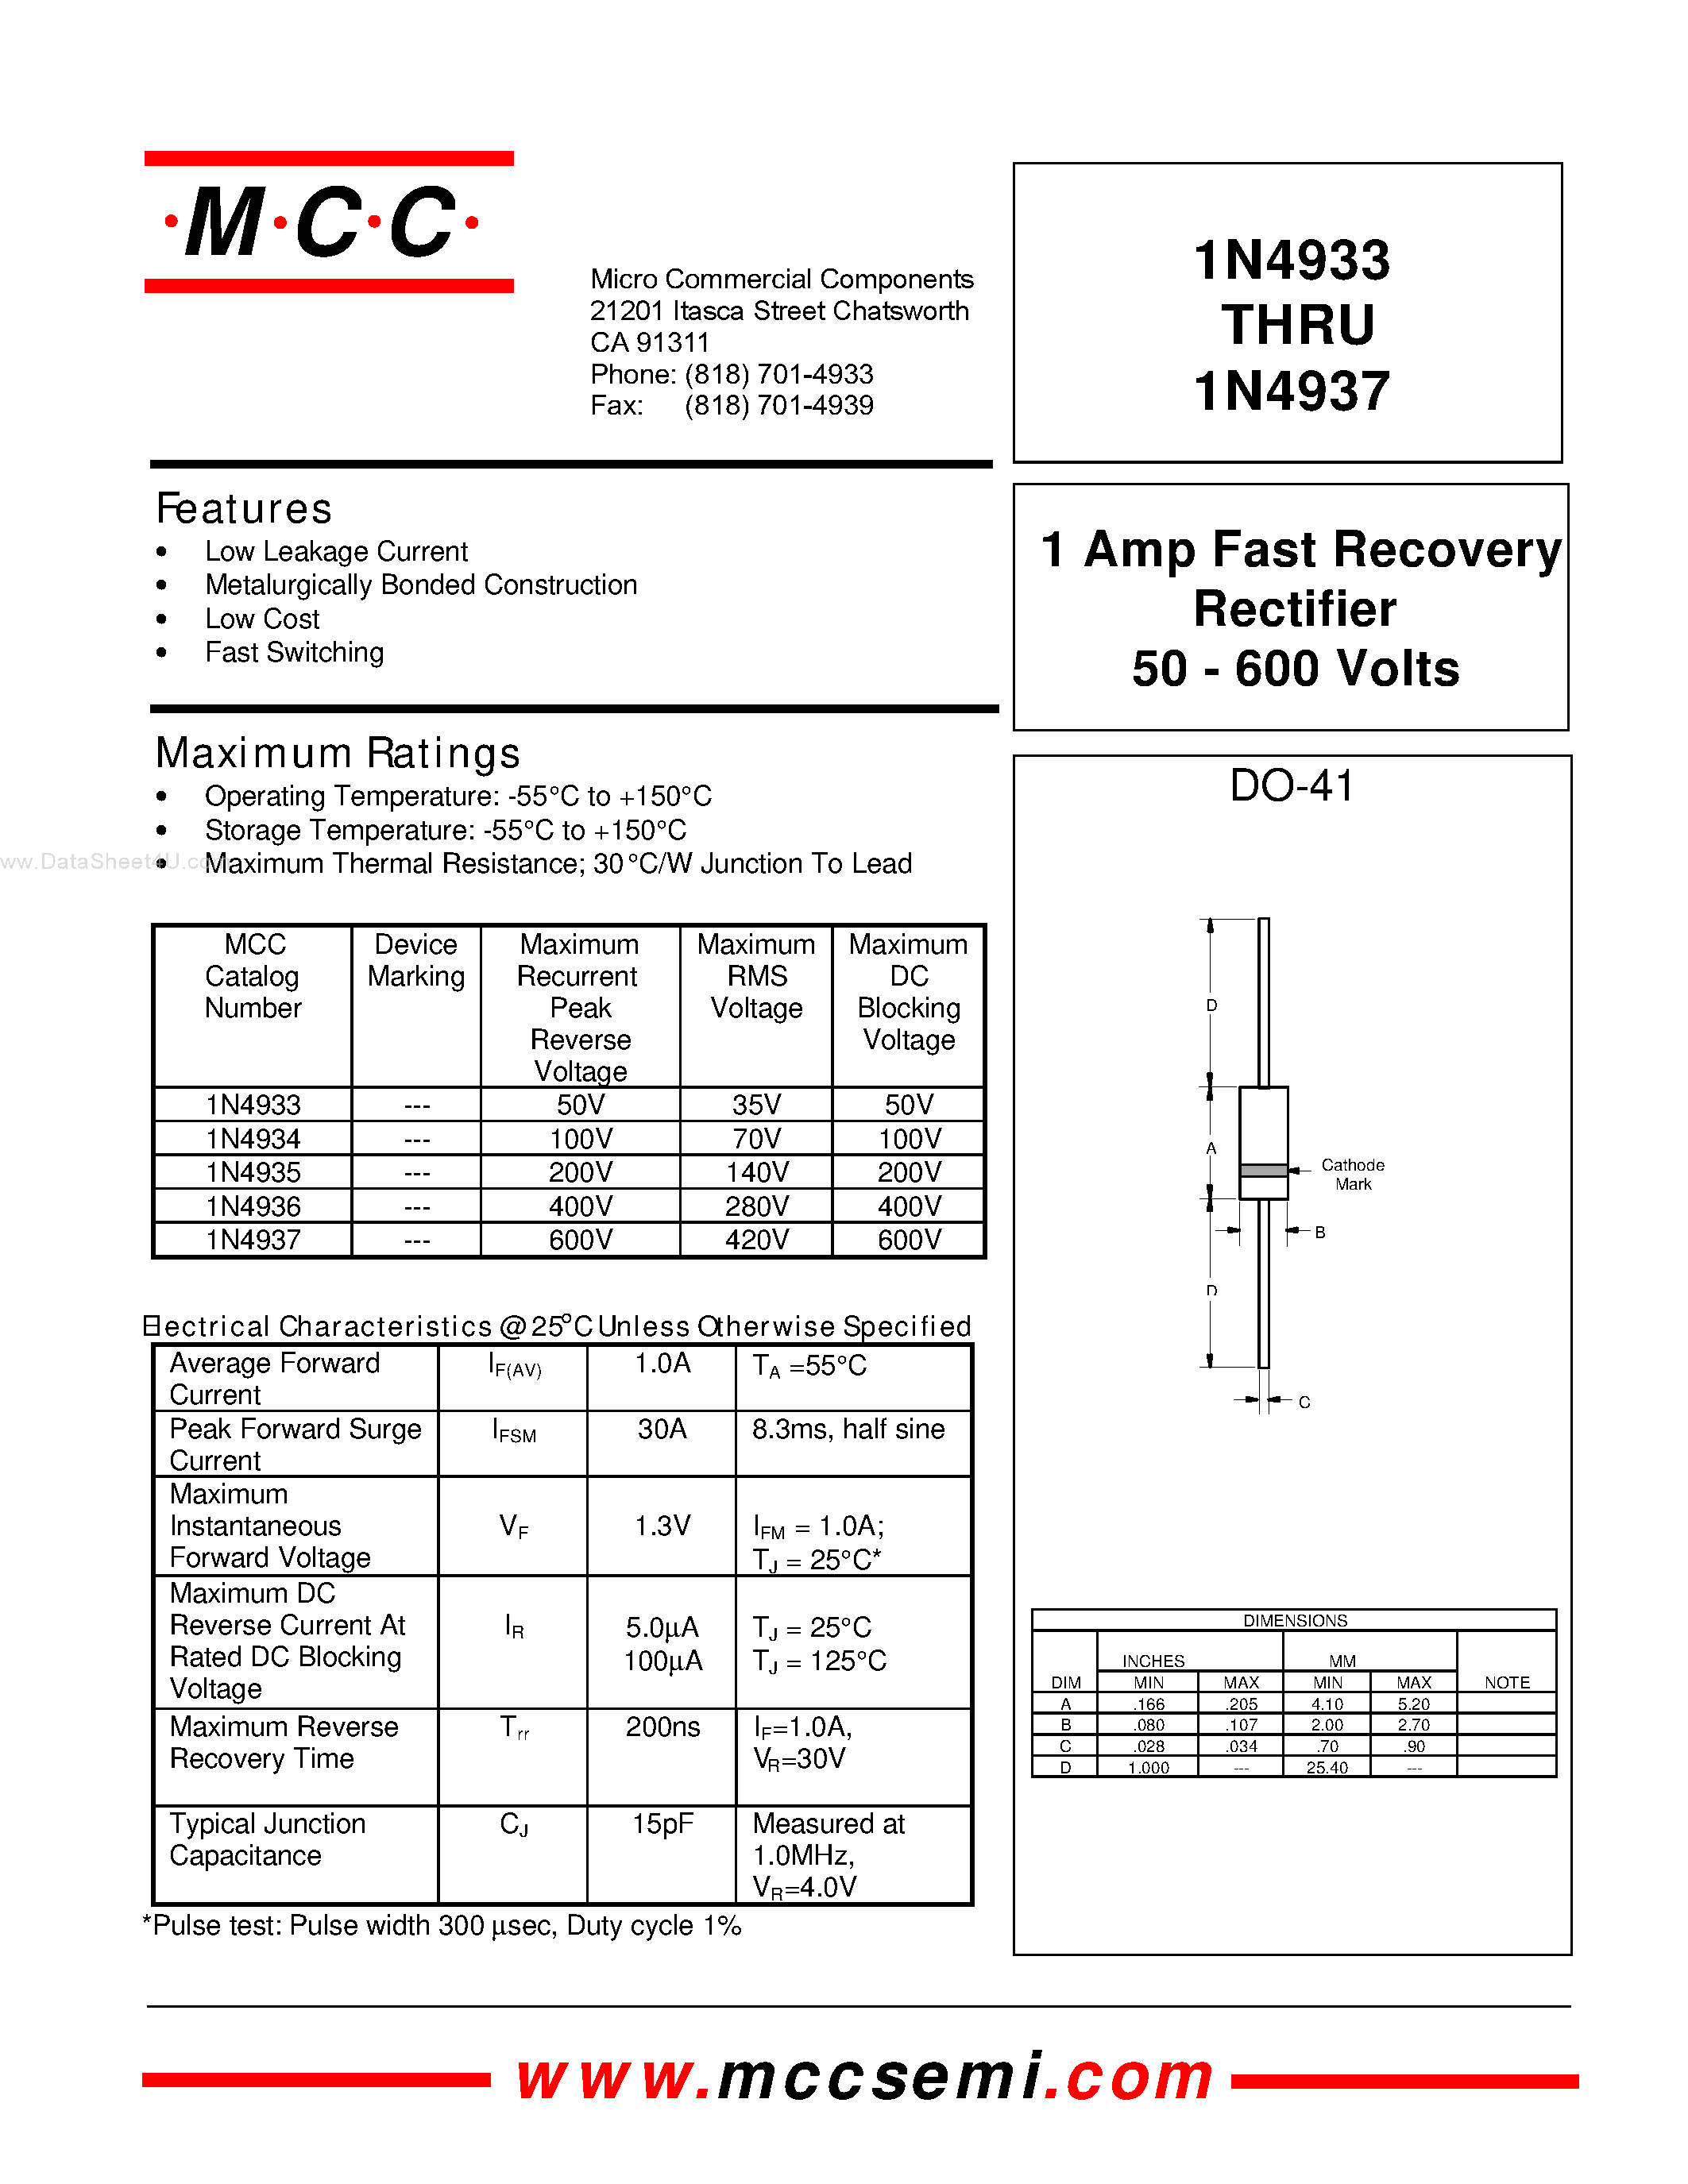 Datasheet IN4934 - (IN4933 - IN4937) 1 Amp Fast Recovery Rectifier page 1